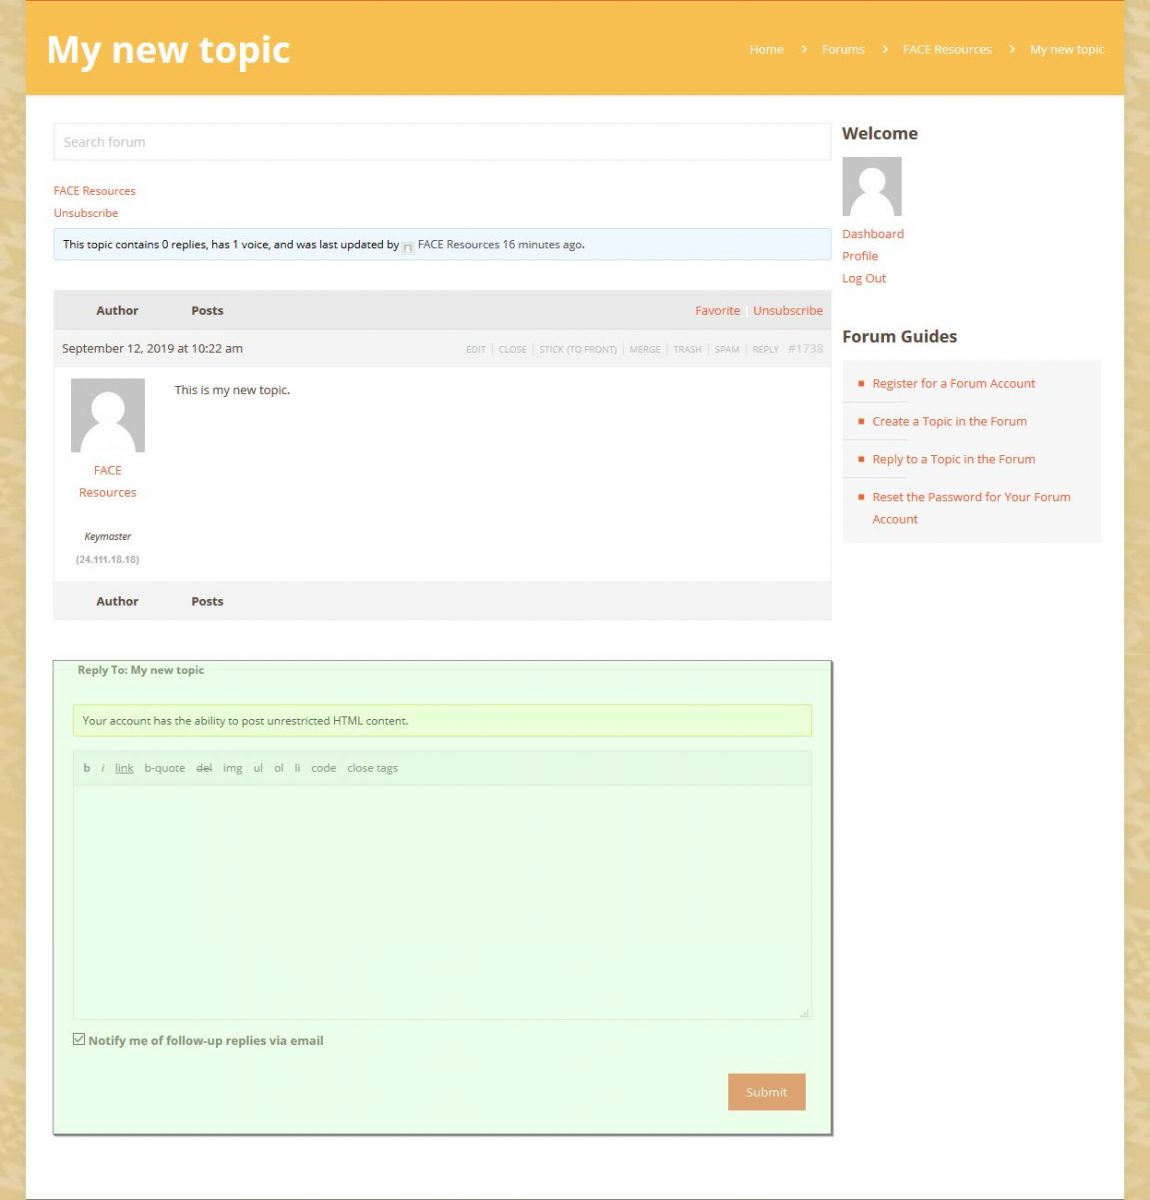 Reply to a Topic in the Forum - Step 3: Fill out the reply form.